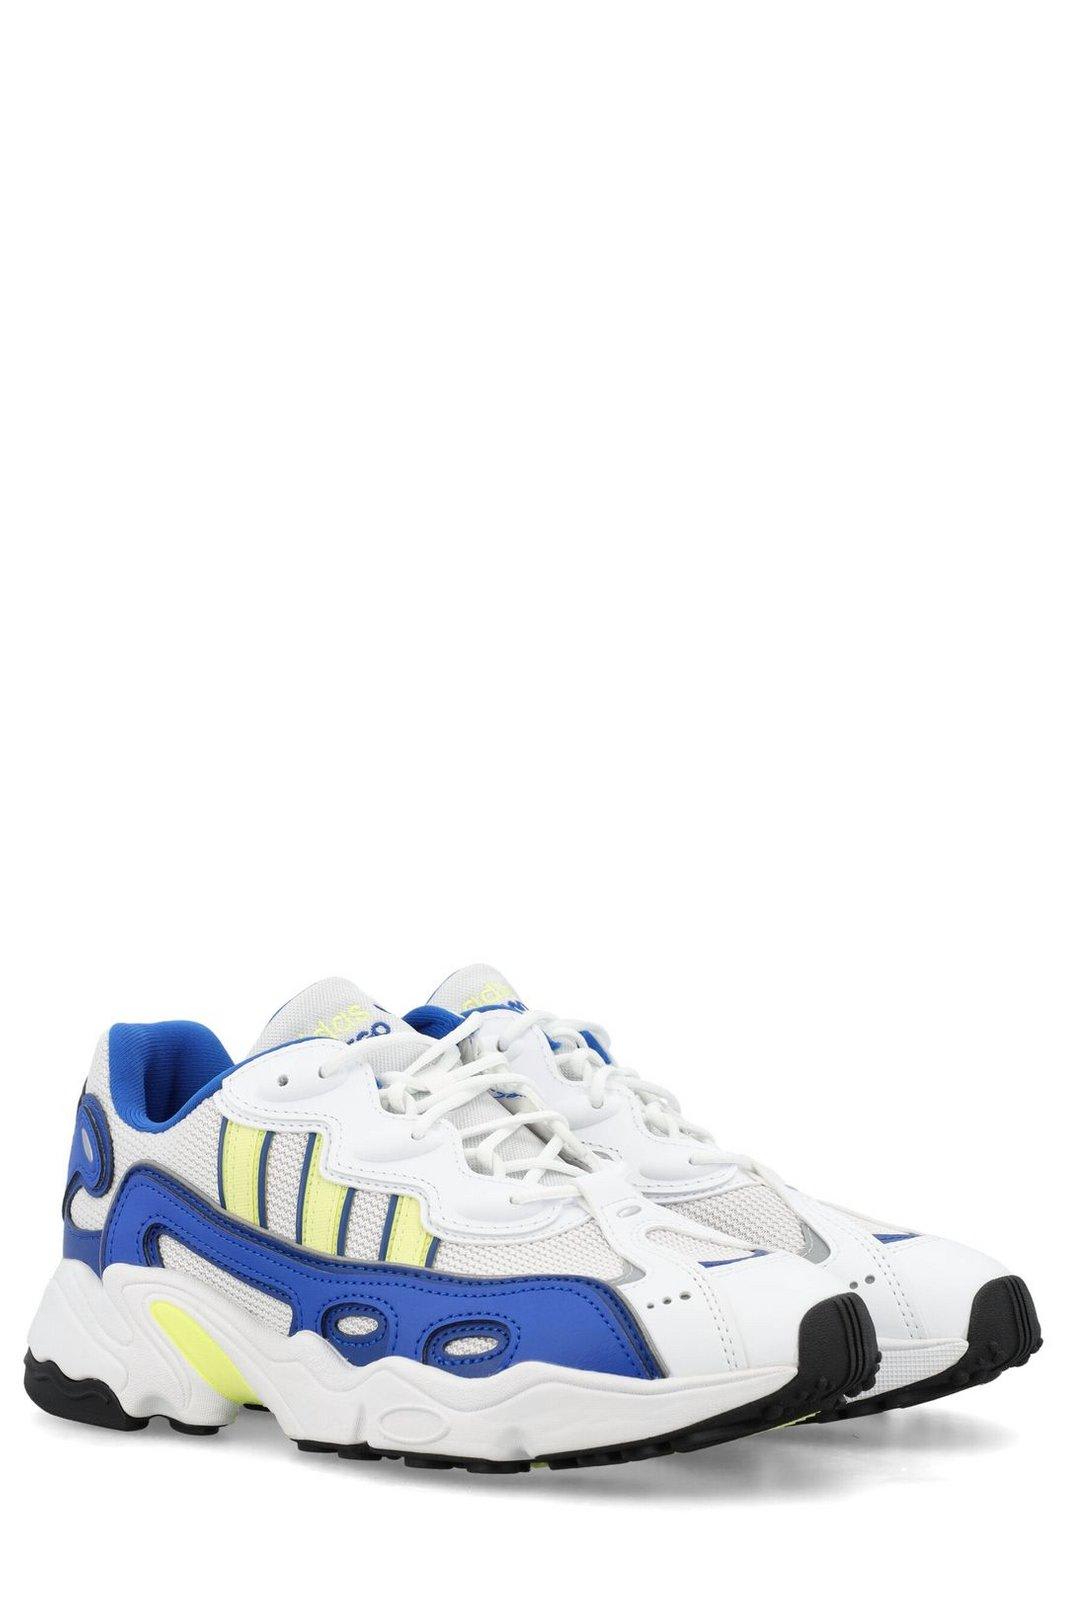 Shop Adidas Originals Ozweego Lace-up Sneakers In Ftwwht/pulyel/royblu